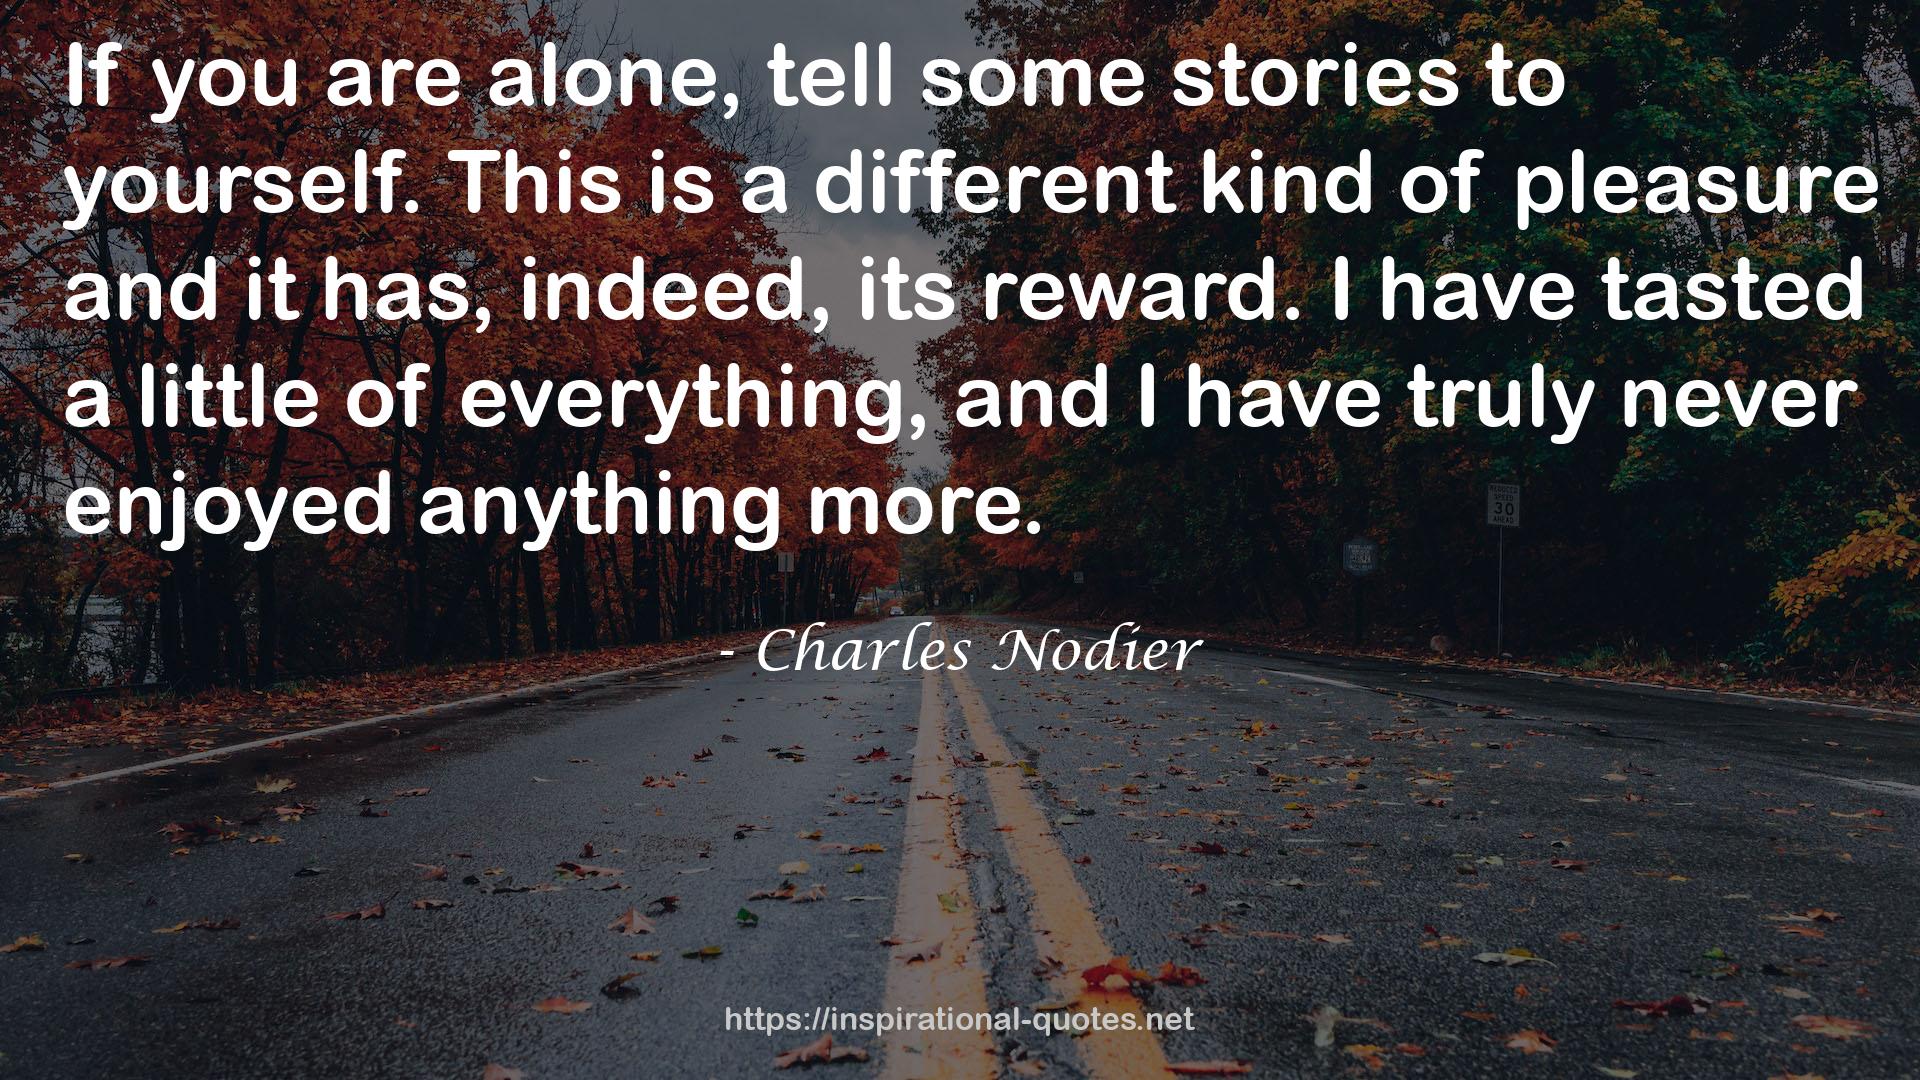 Charles Nodier QUOTES